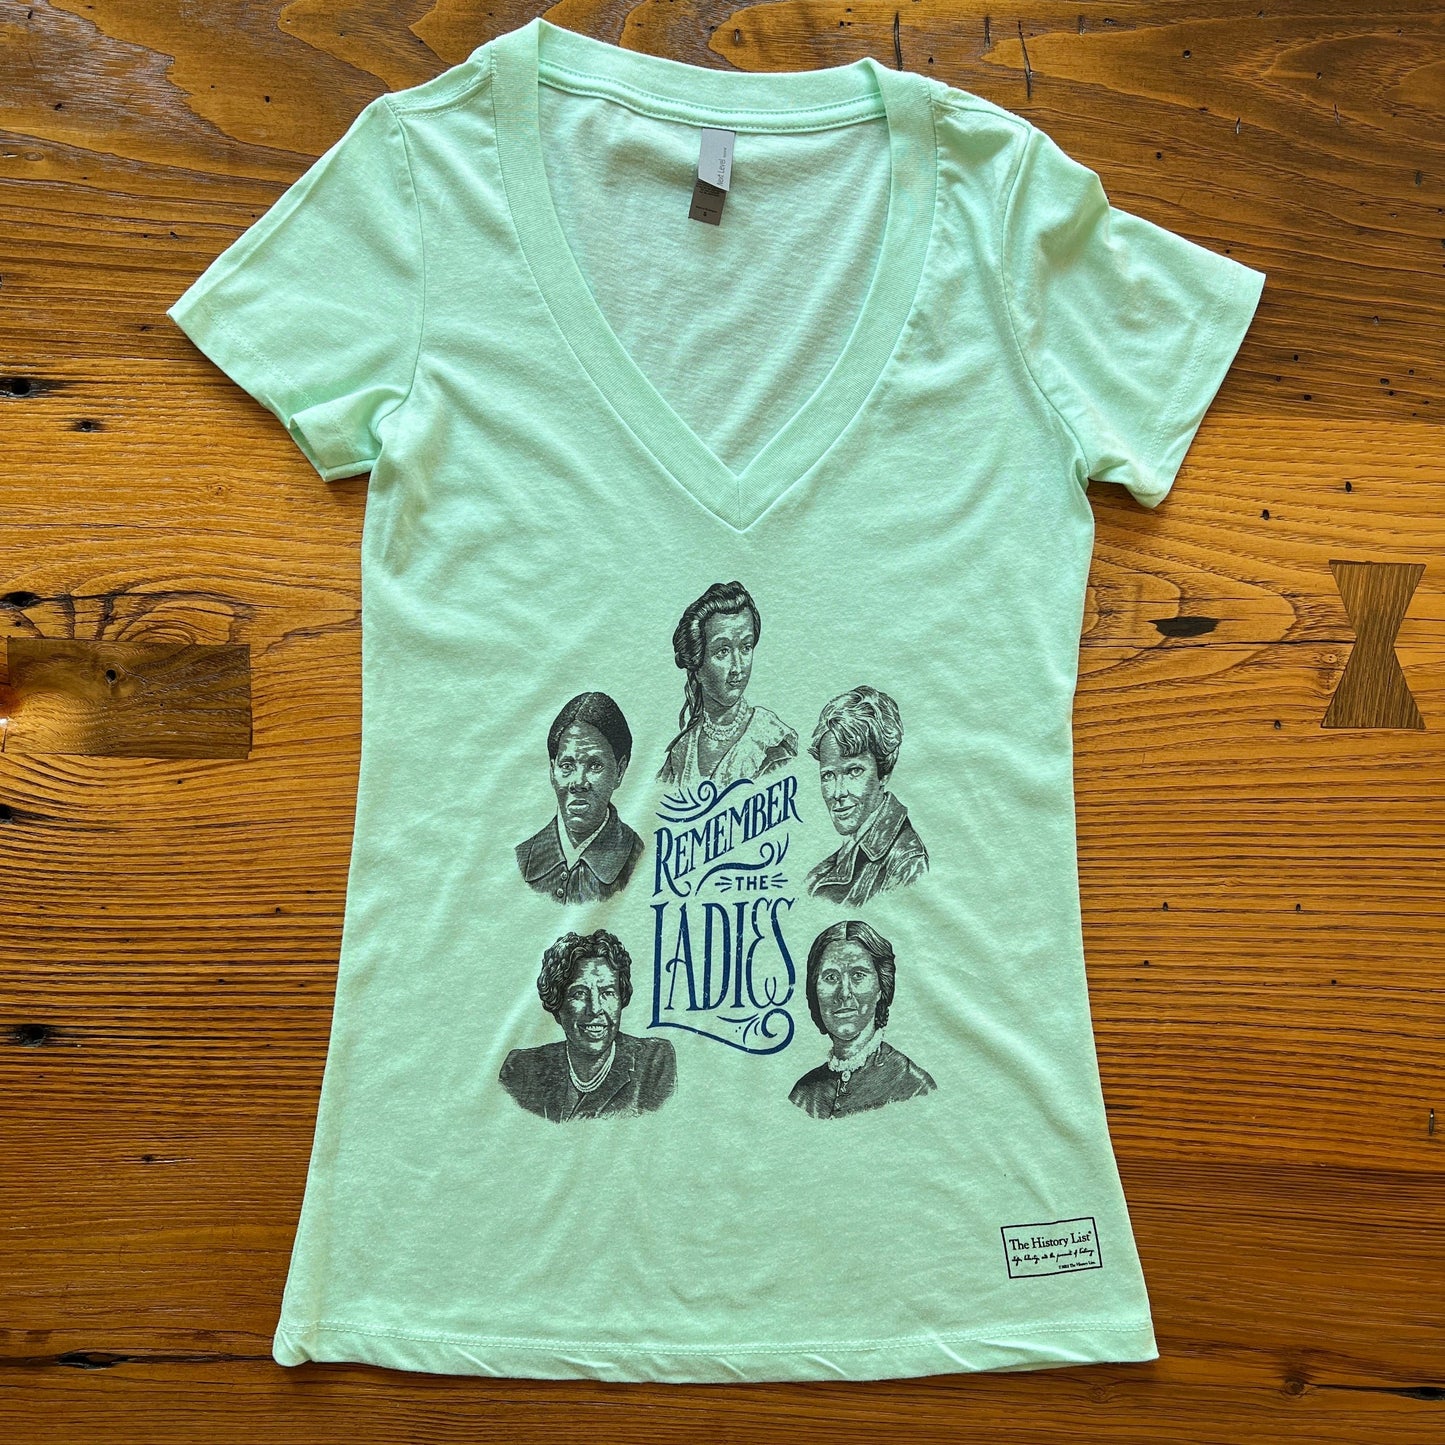 "Remember the Ladies" Women's v-neck shirt — Circular design in mint from The History List store